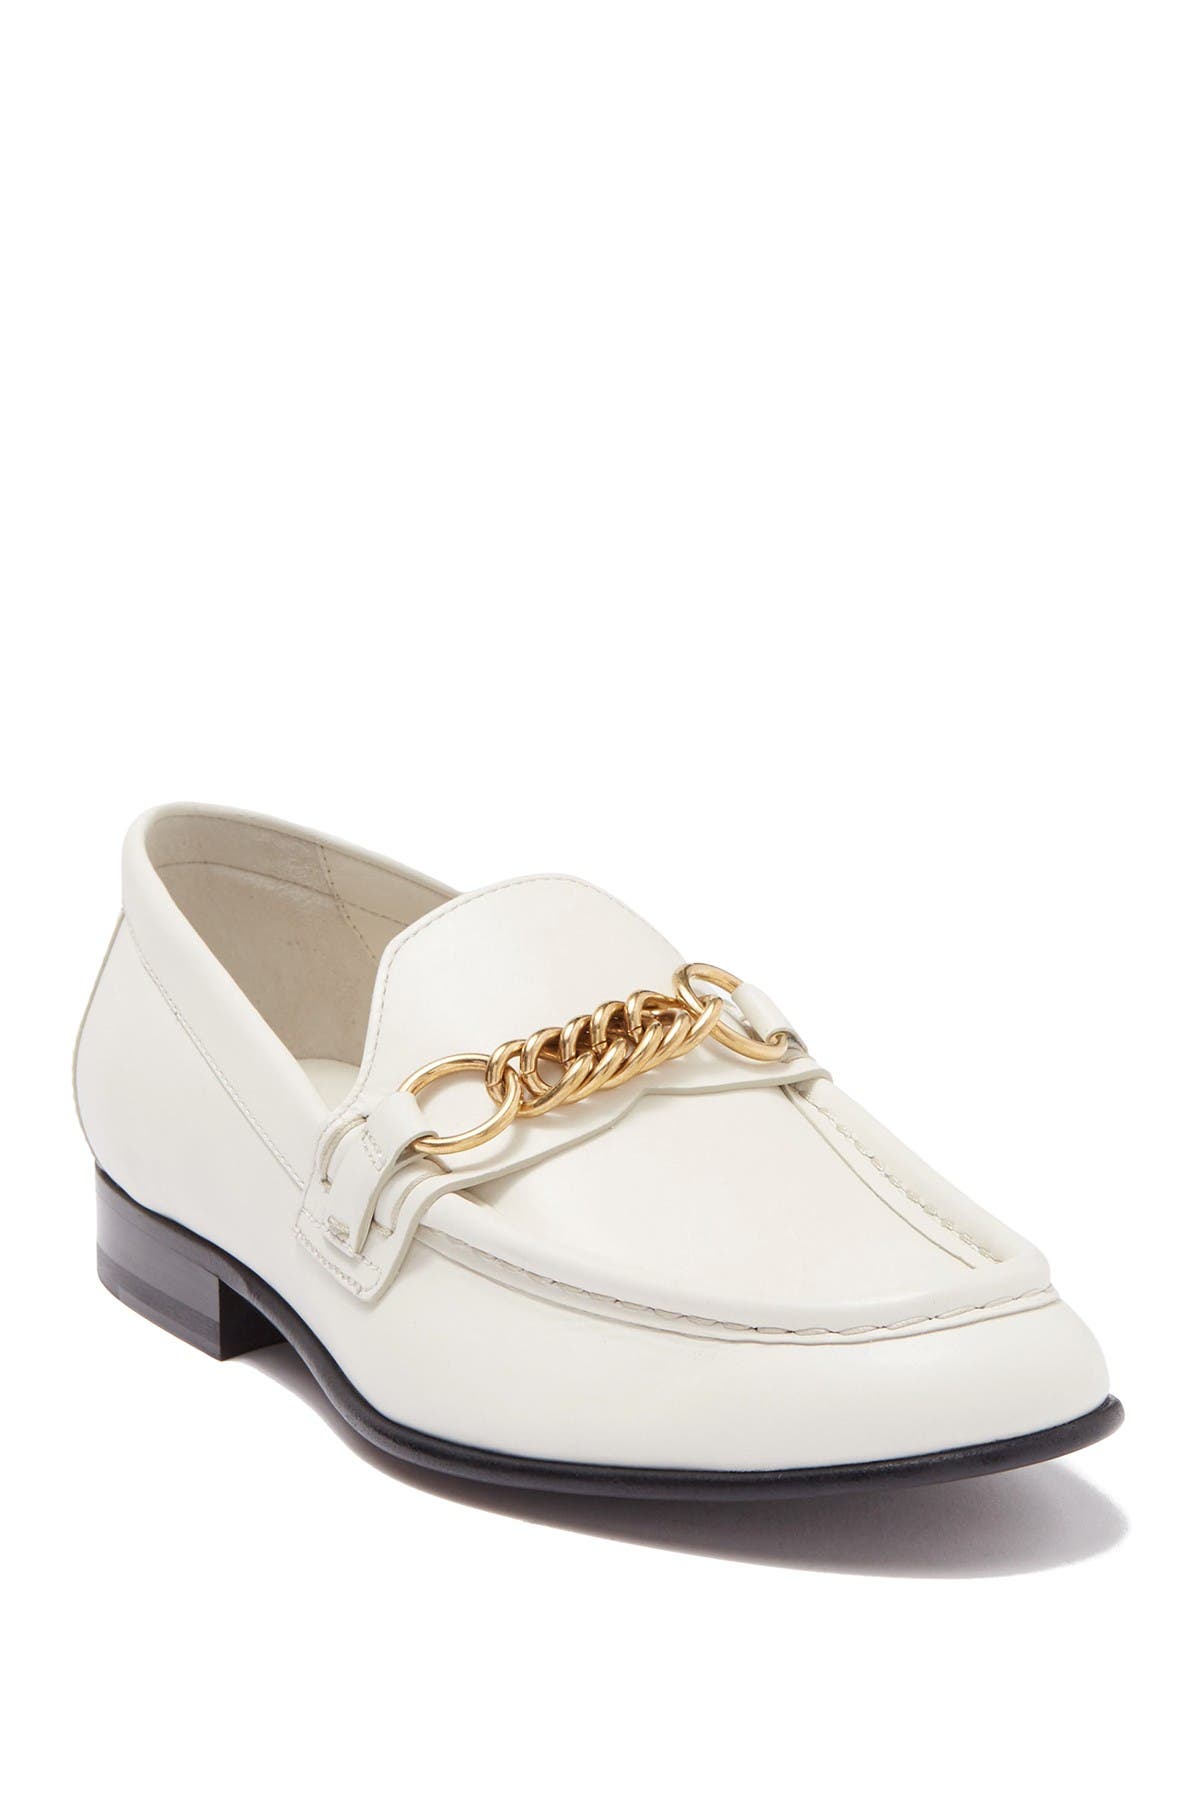 Burberry | Solway Chain Loafer 